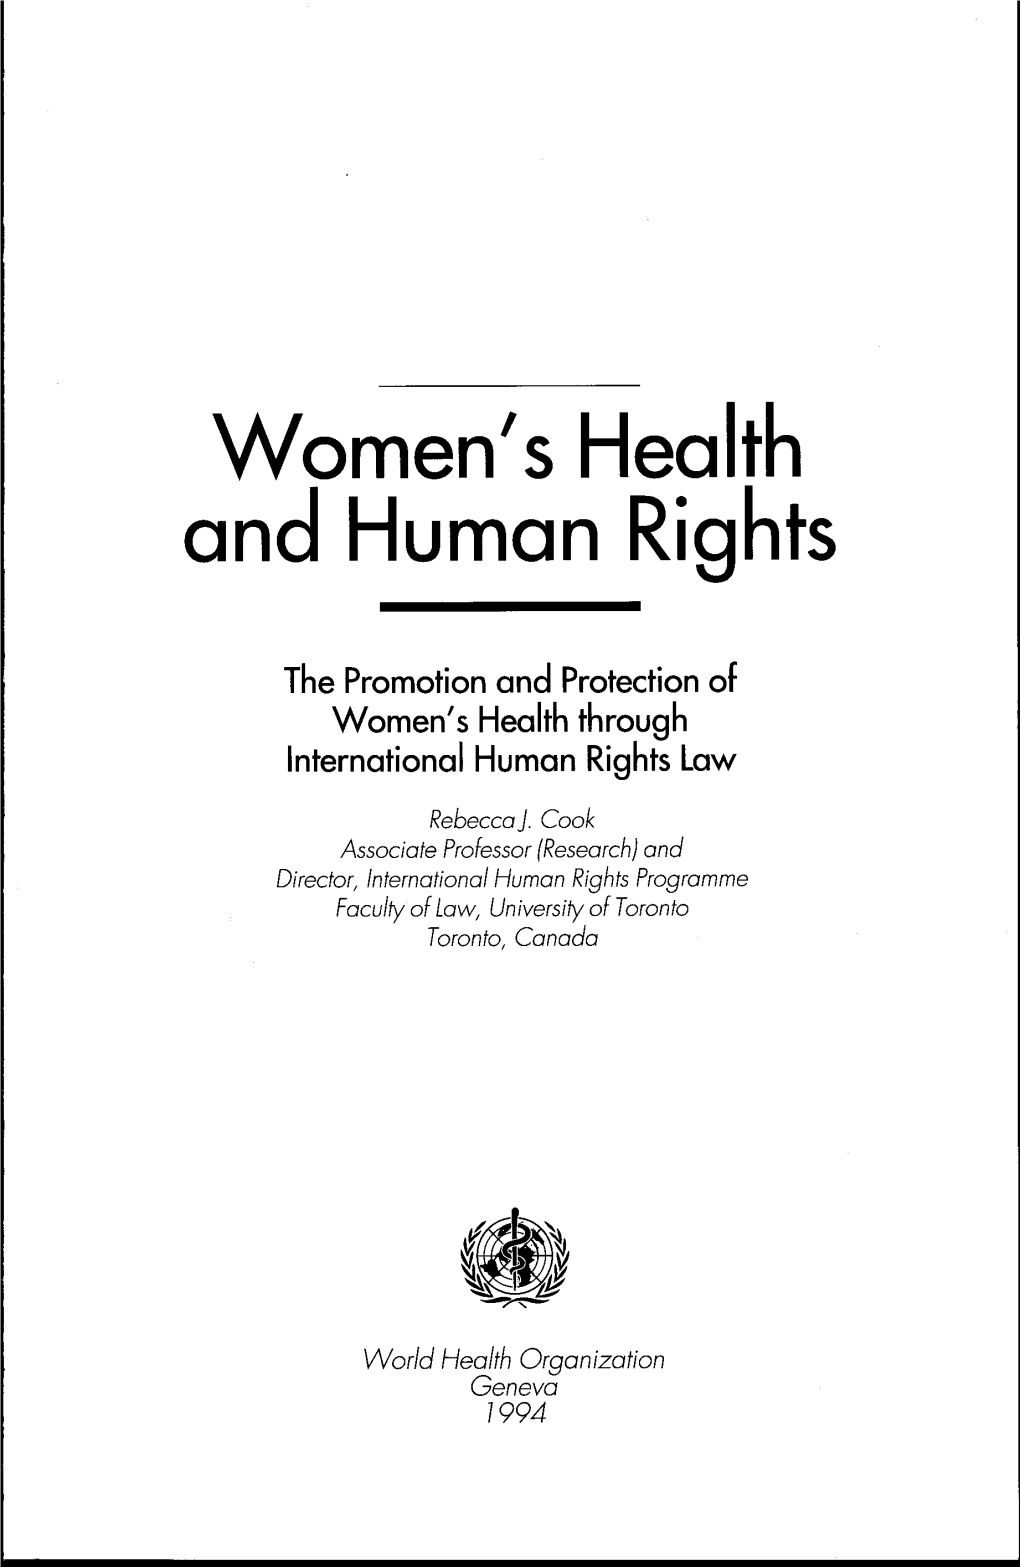 Women's Health and Human Rights